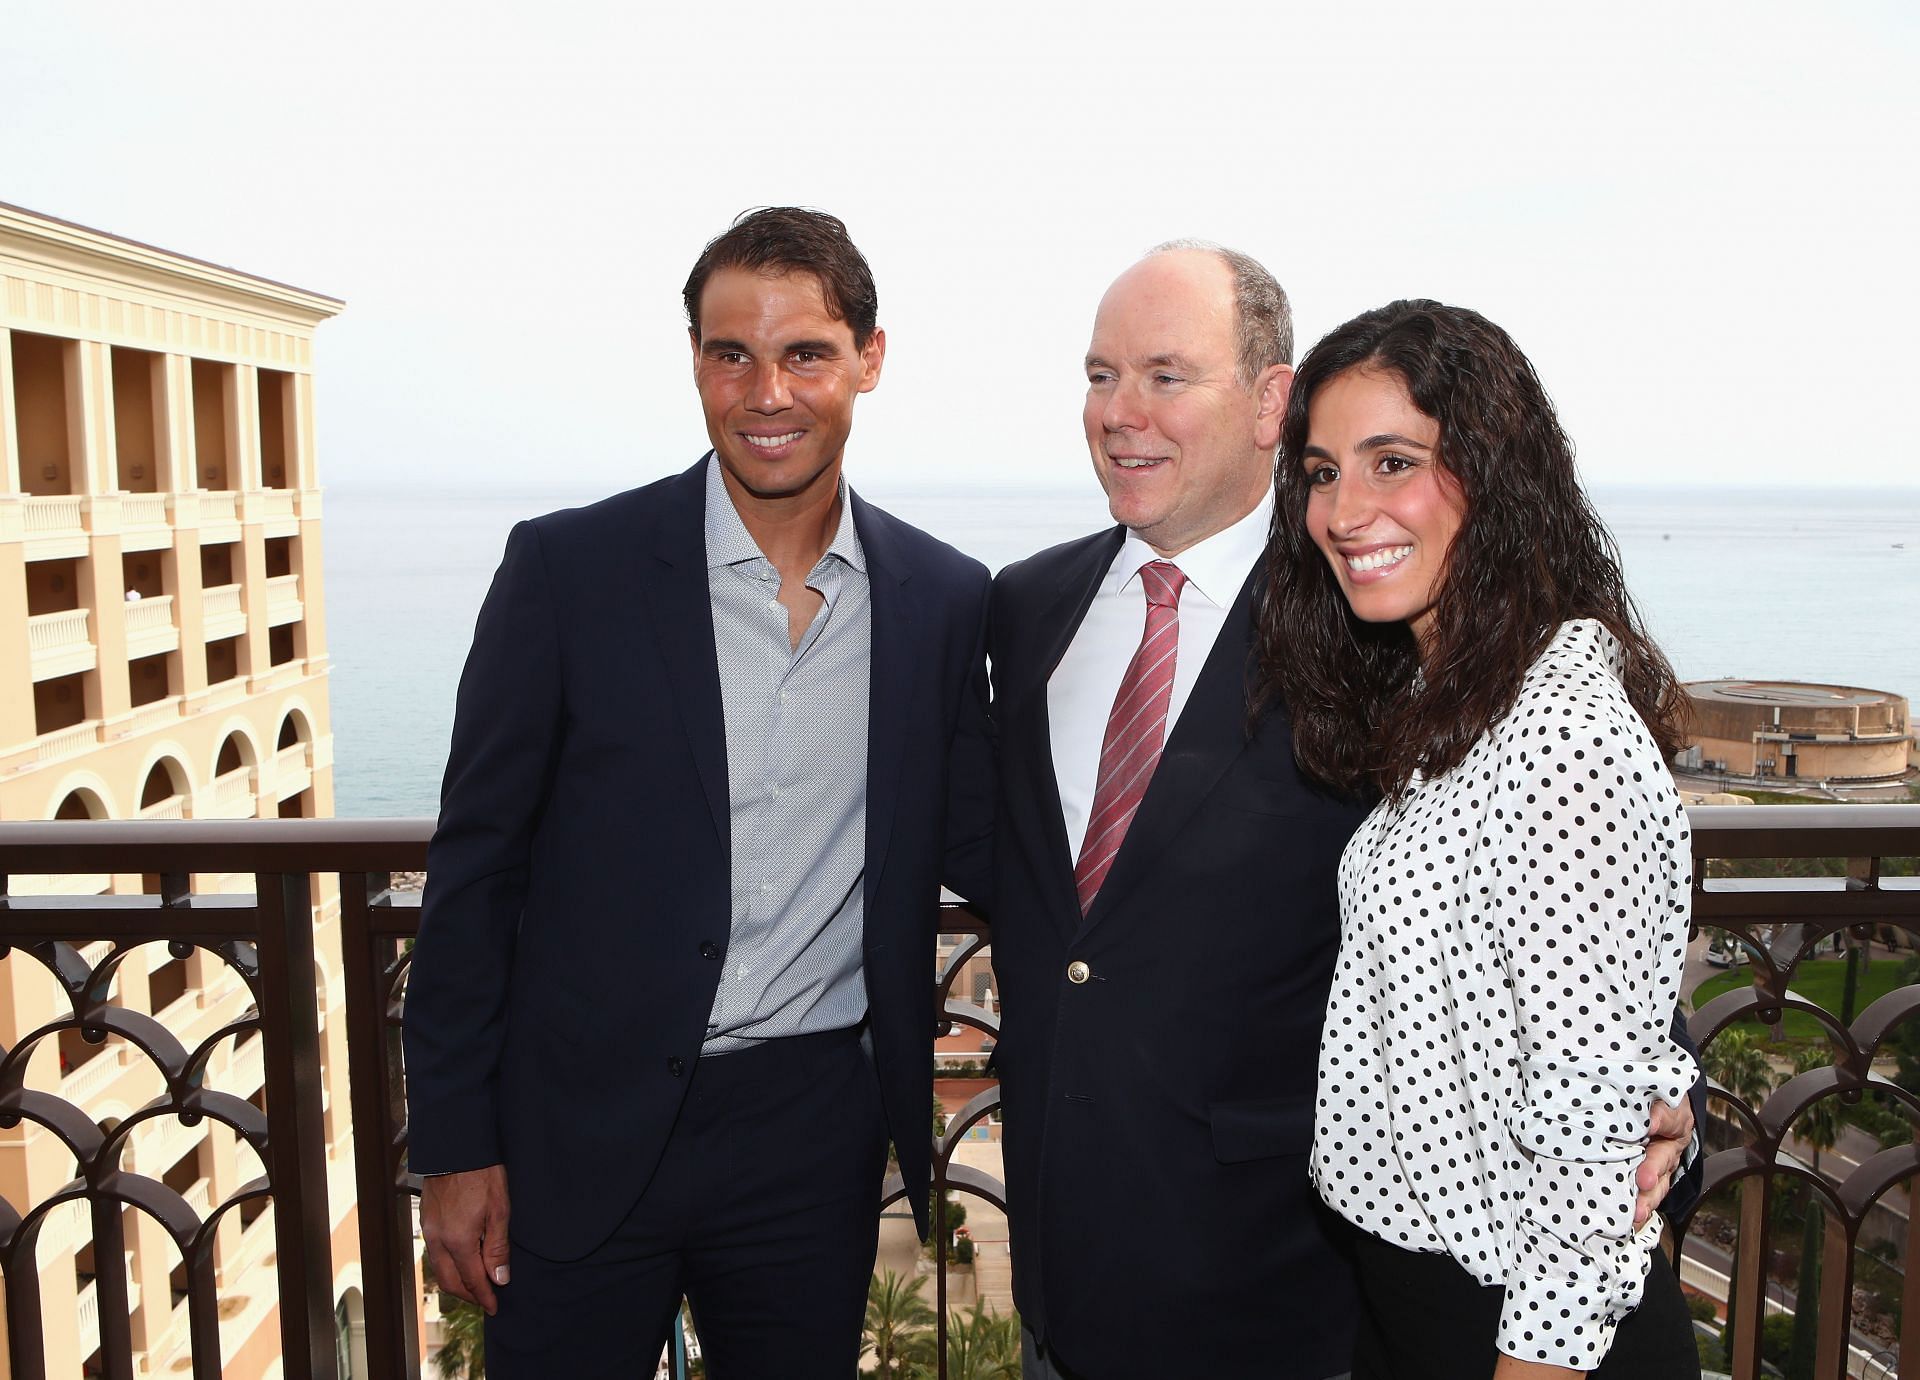 According to Maria Francisca Perello (R), Rafael Nadal needs his space when competing in tournaments